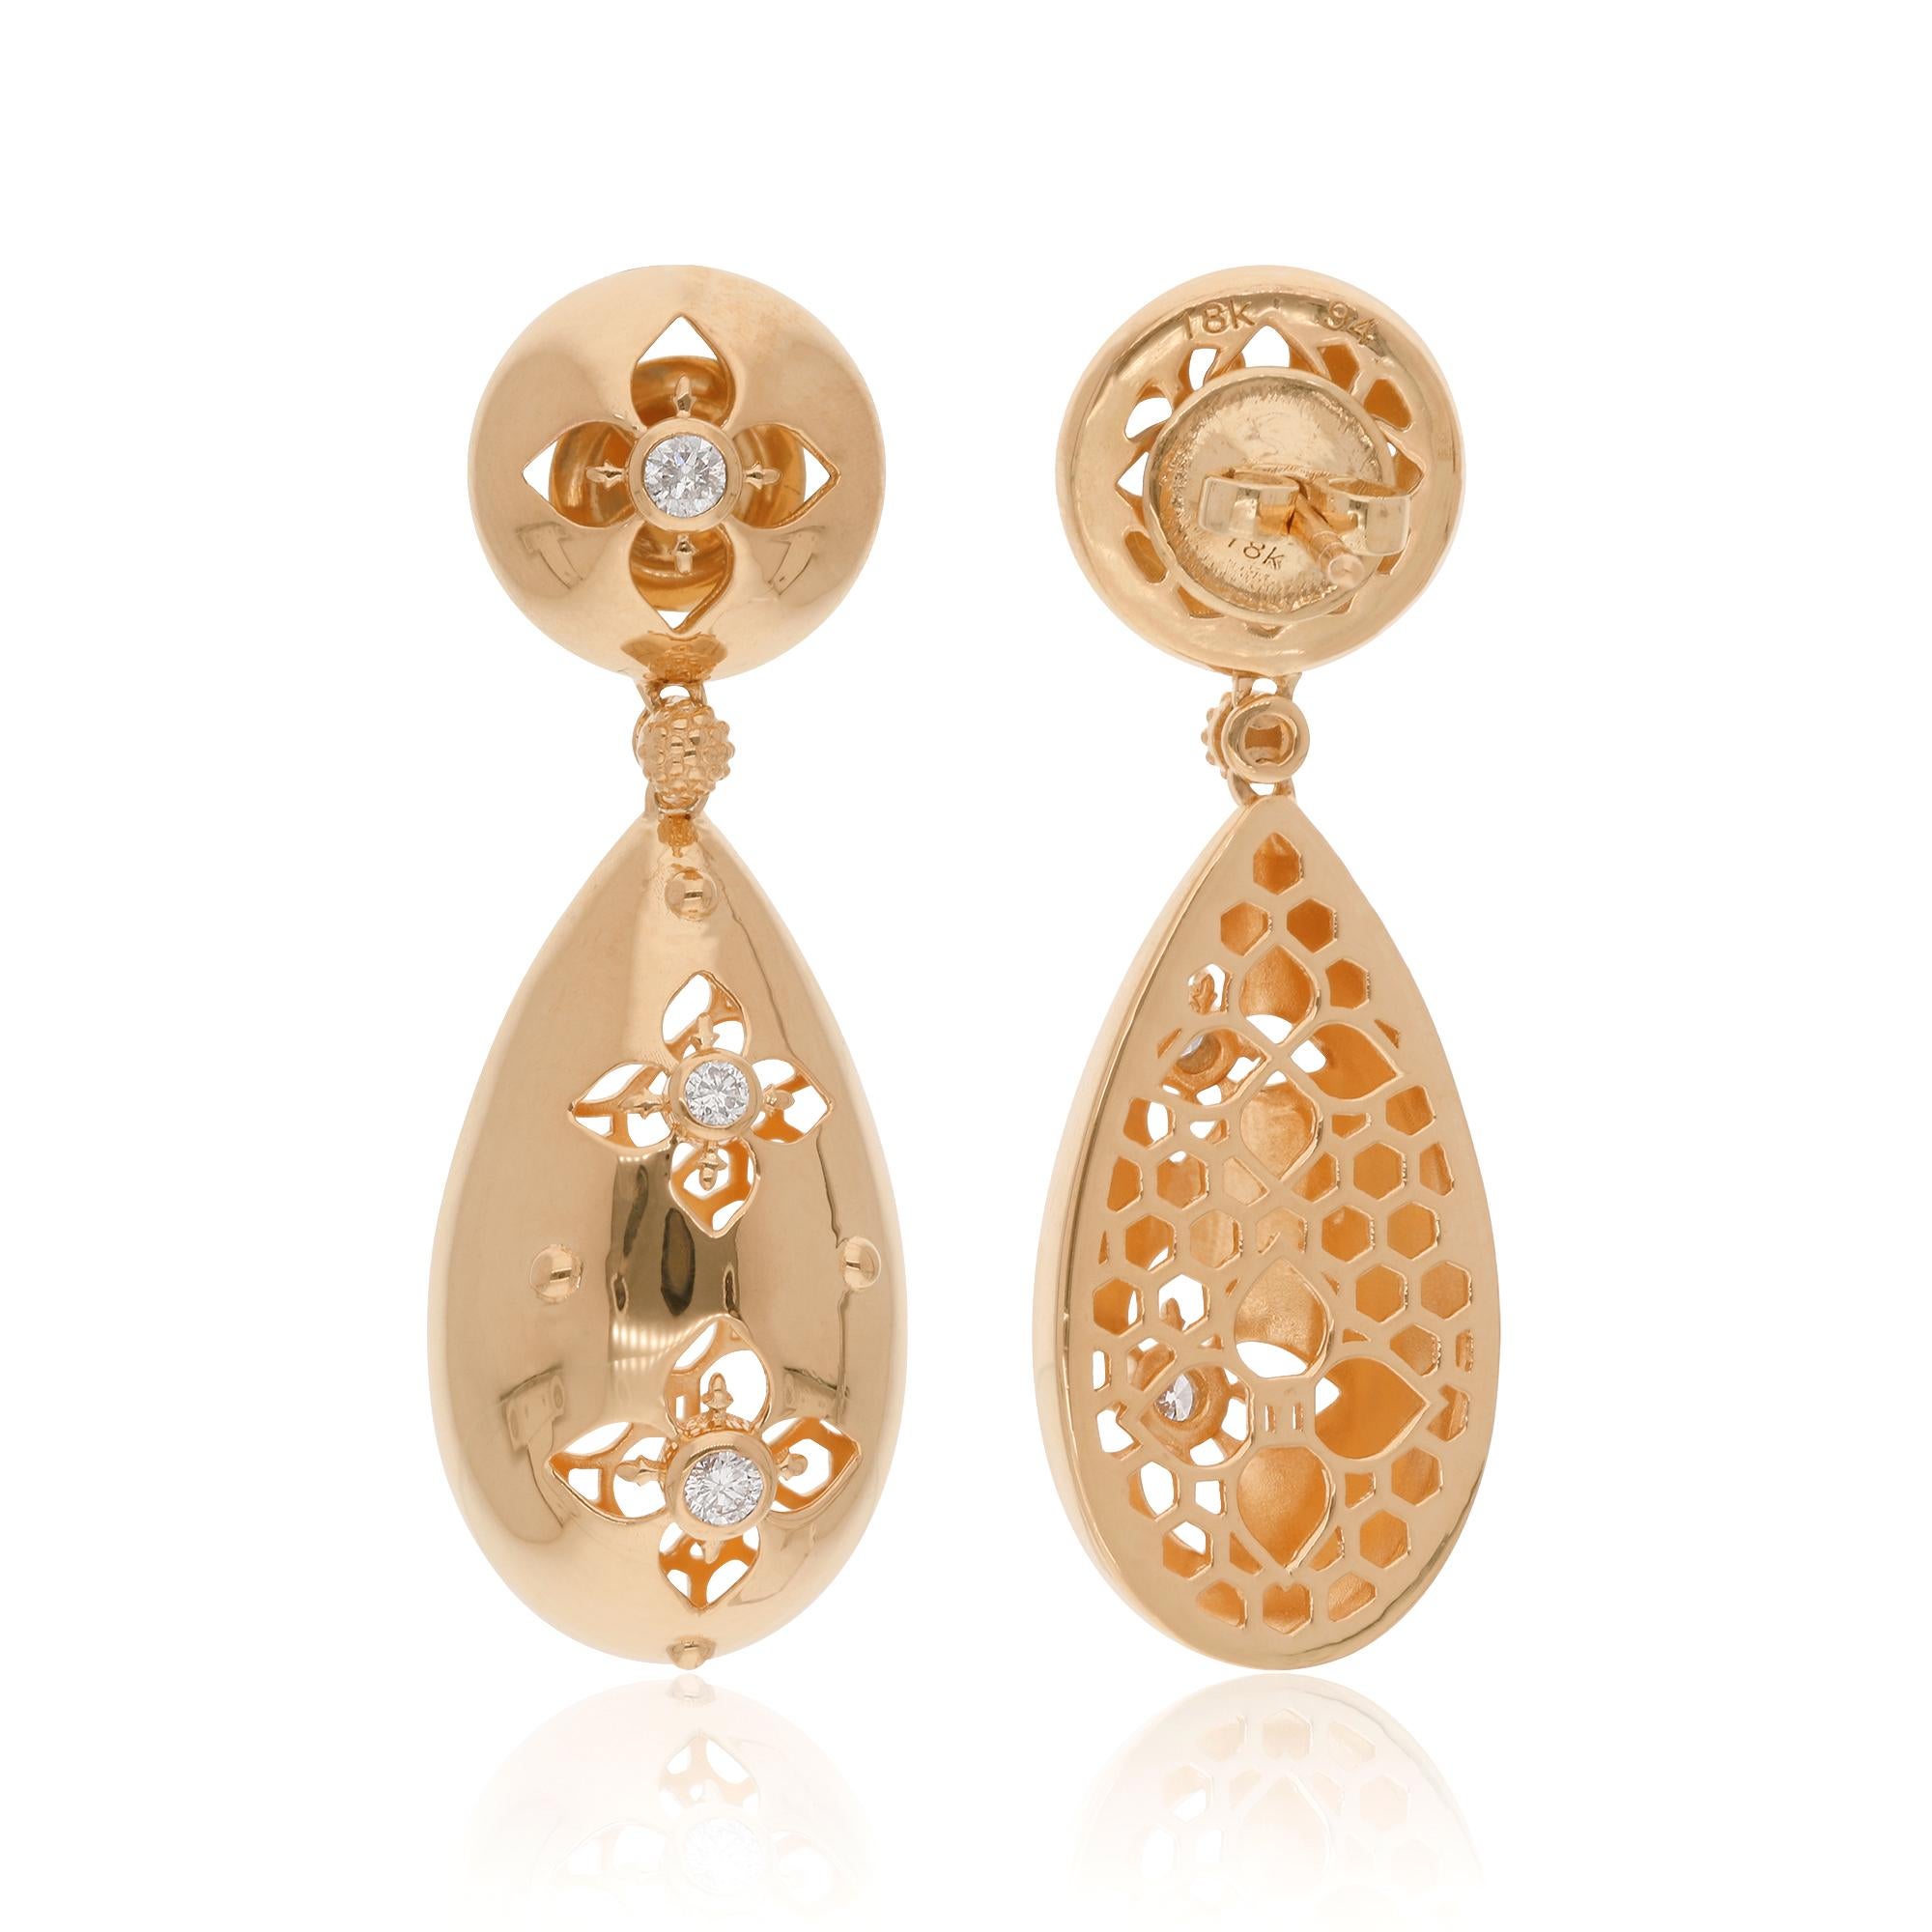 Immerse yourself in the delicate beauty of nature with these enchanting Natural 0.28 Carat Diamond Flower Dangle Earrings, intricately crafted in lustrous 18 Karat Yellow Gold. These exquisite earrings are a celebration of elegance and femininity,